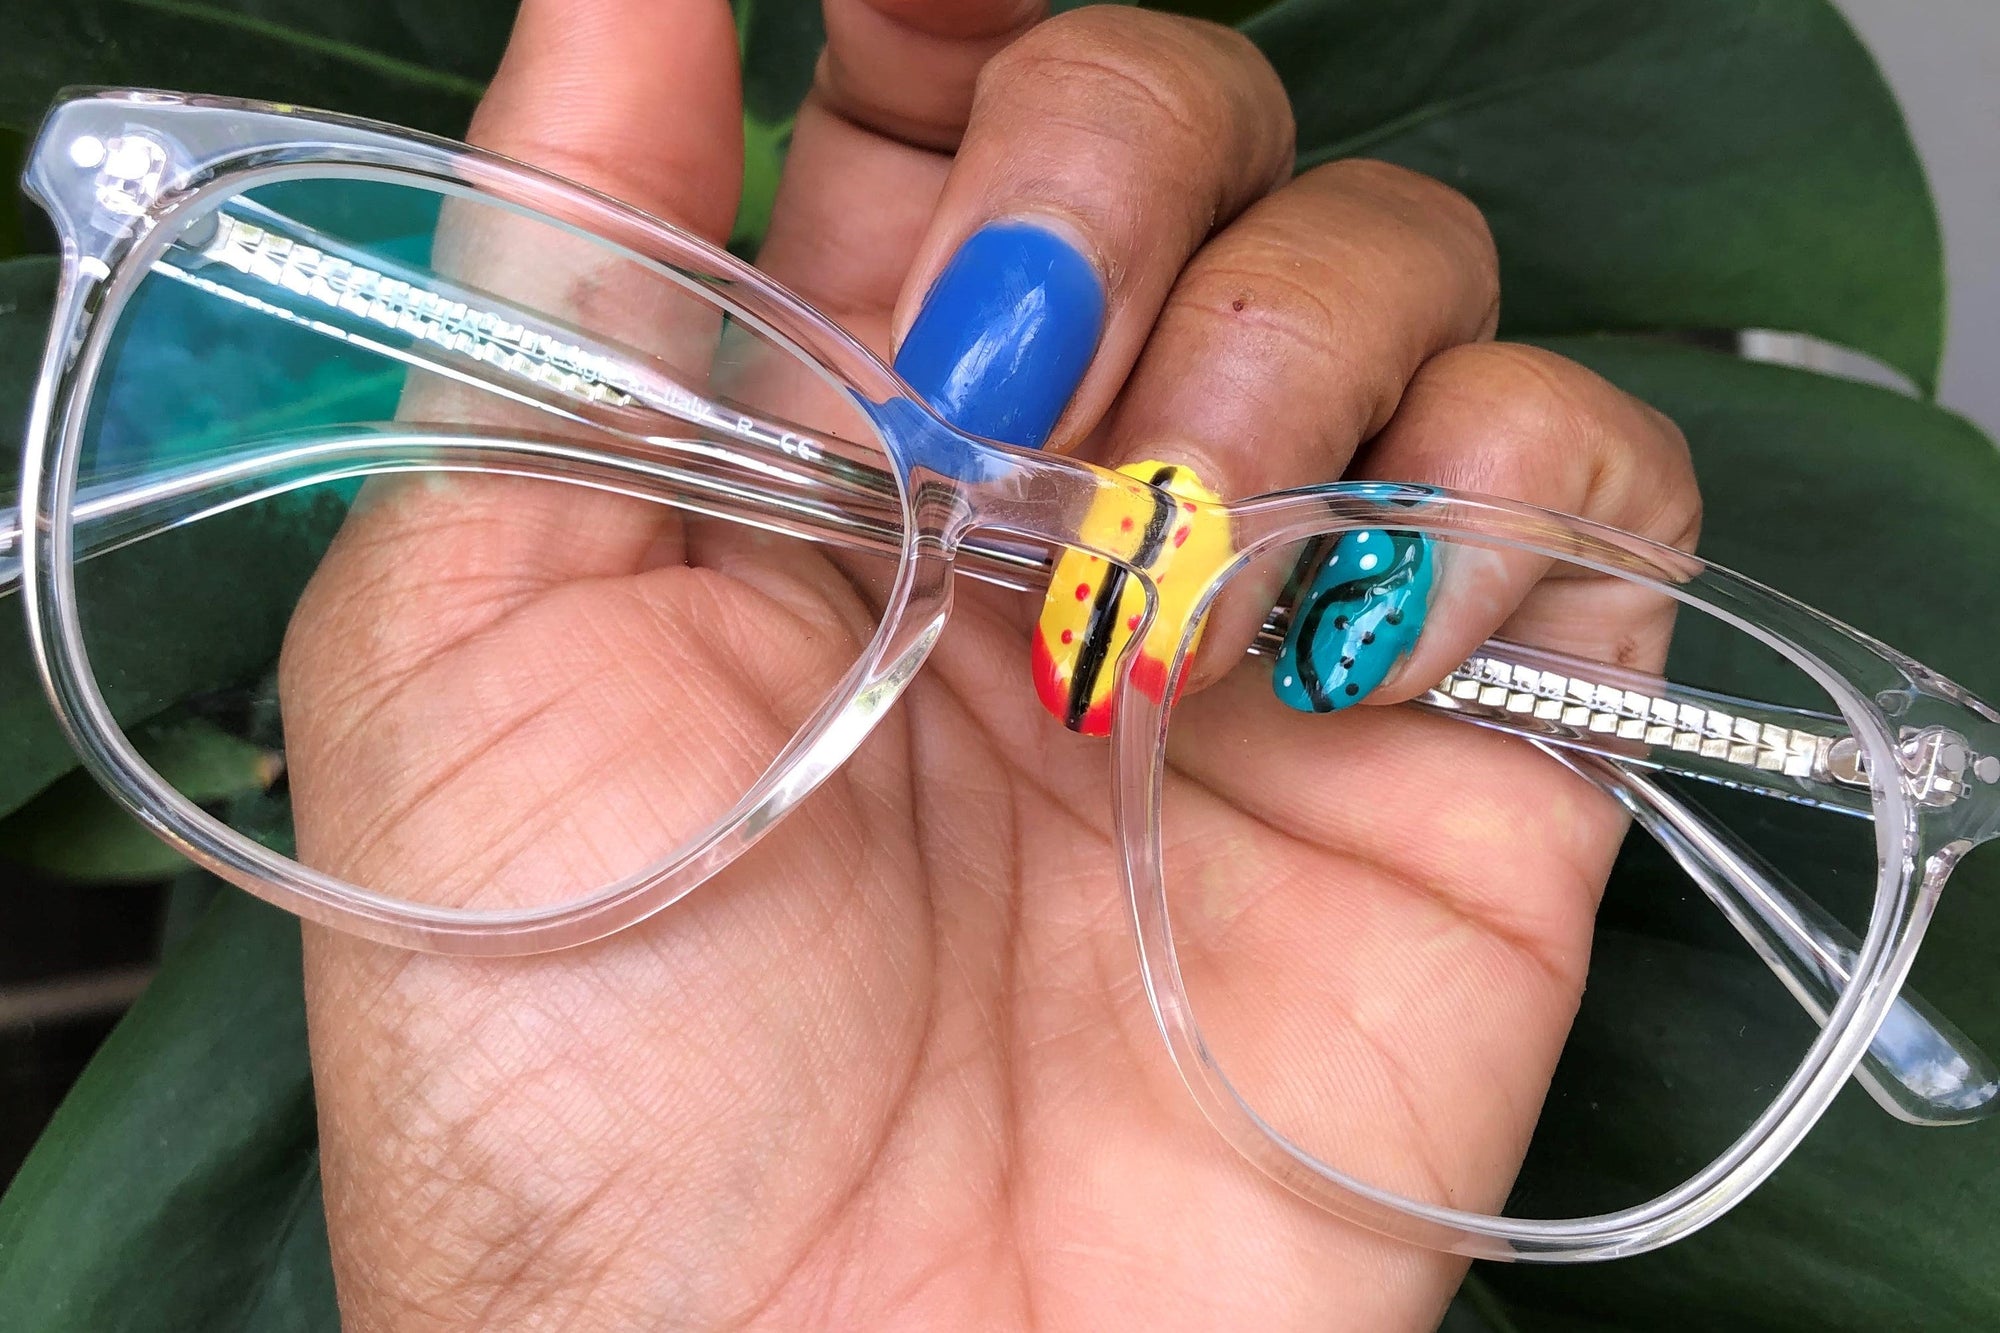 What to do when your eyelashes touch your glasses? | KOALAEYE OPTICAL